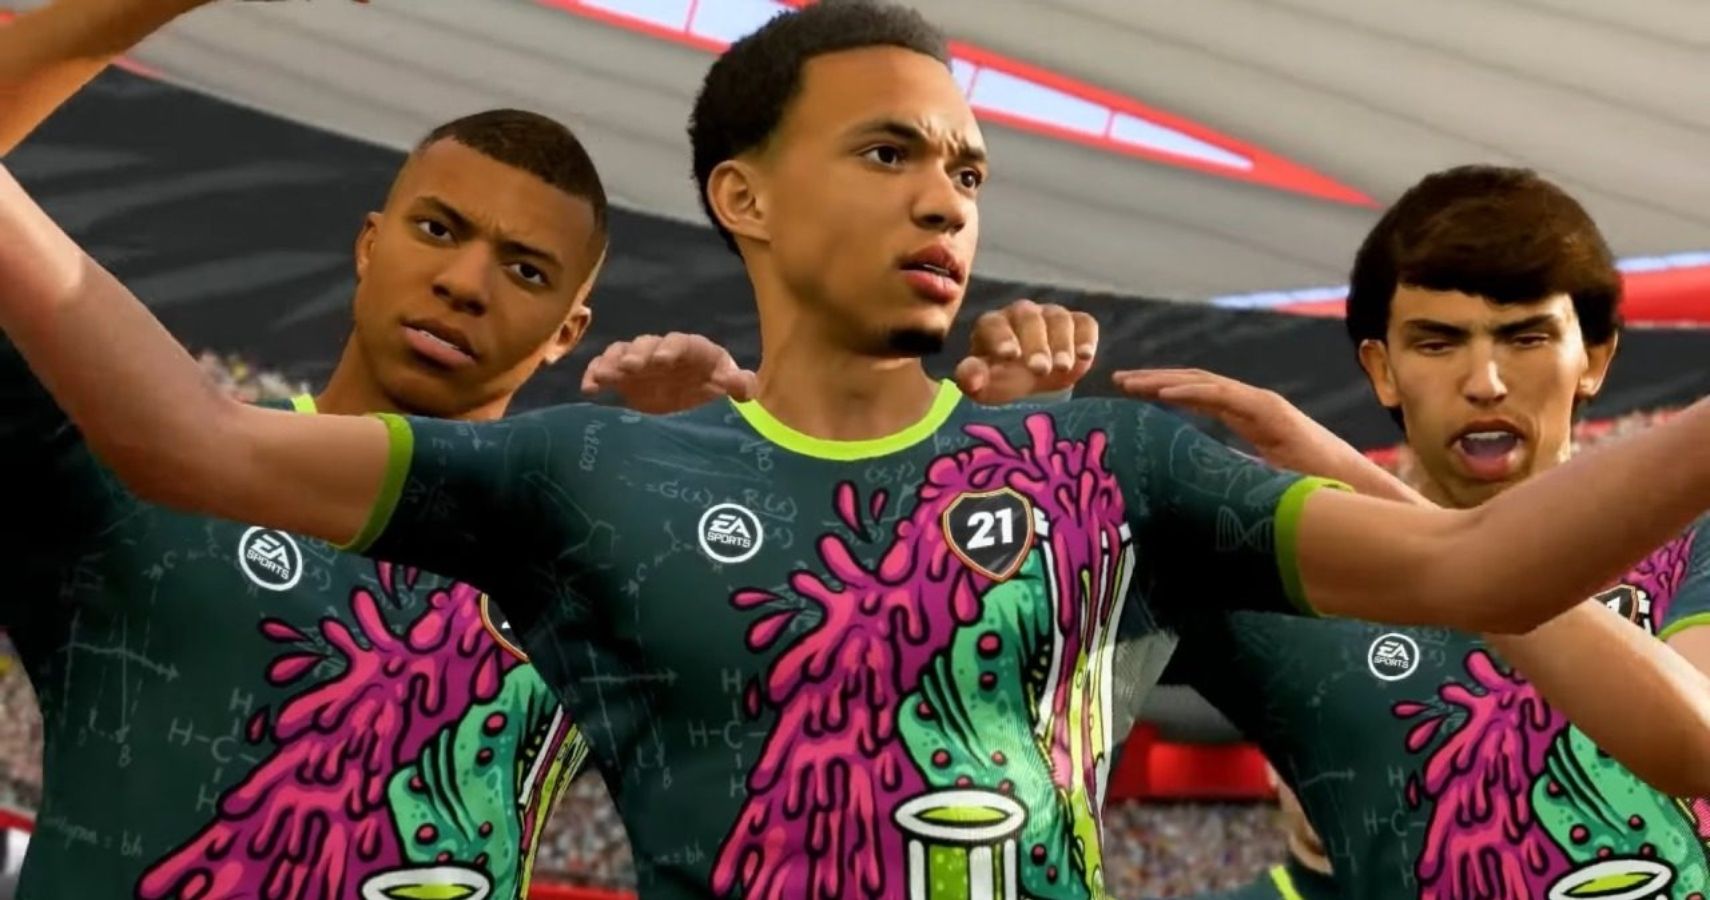 FIFA 21 Players Employing Their Own Unofficial Golden Goal Rule To